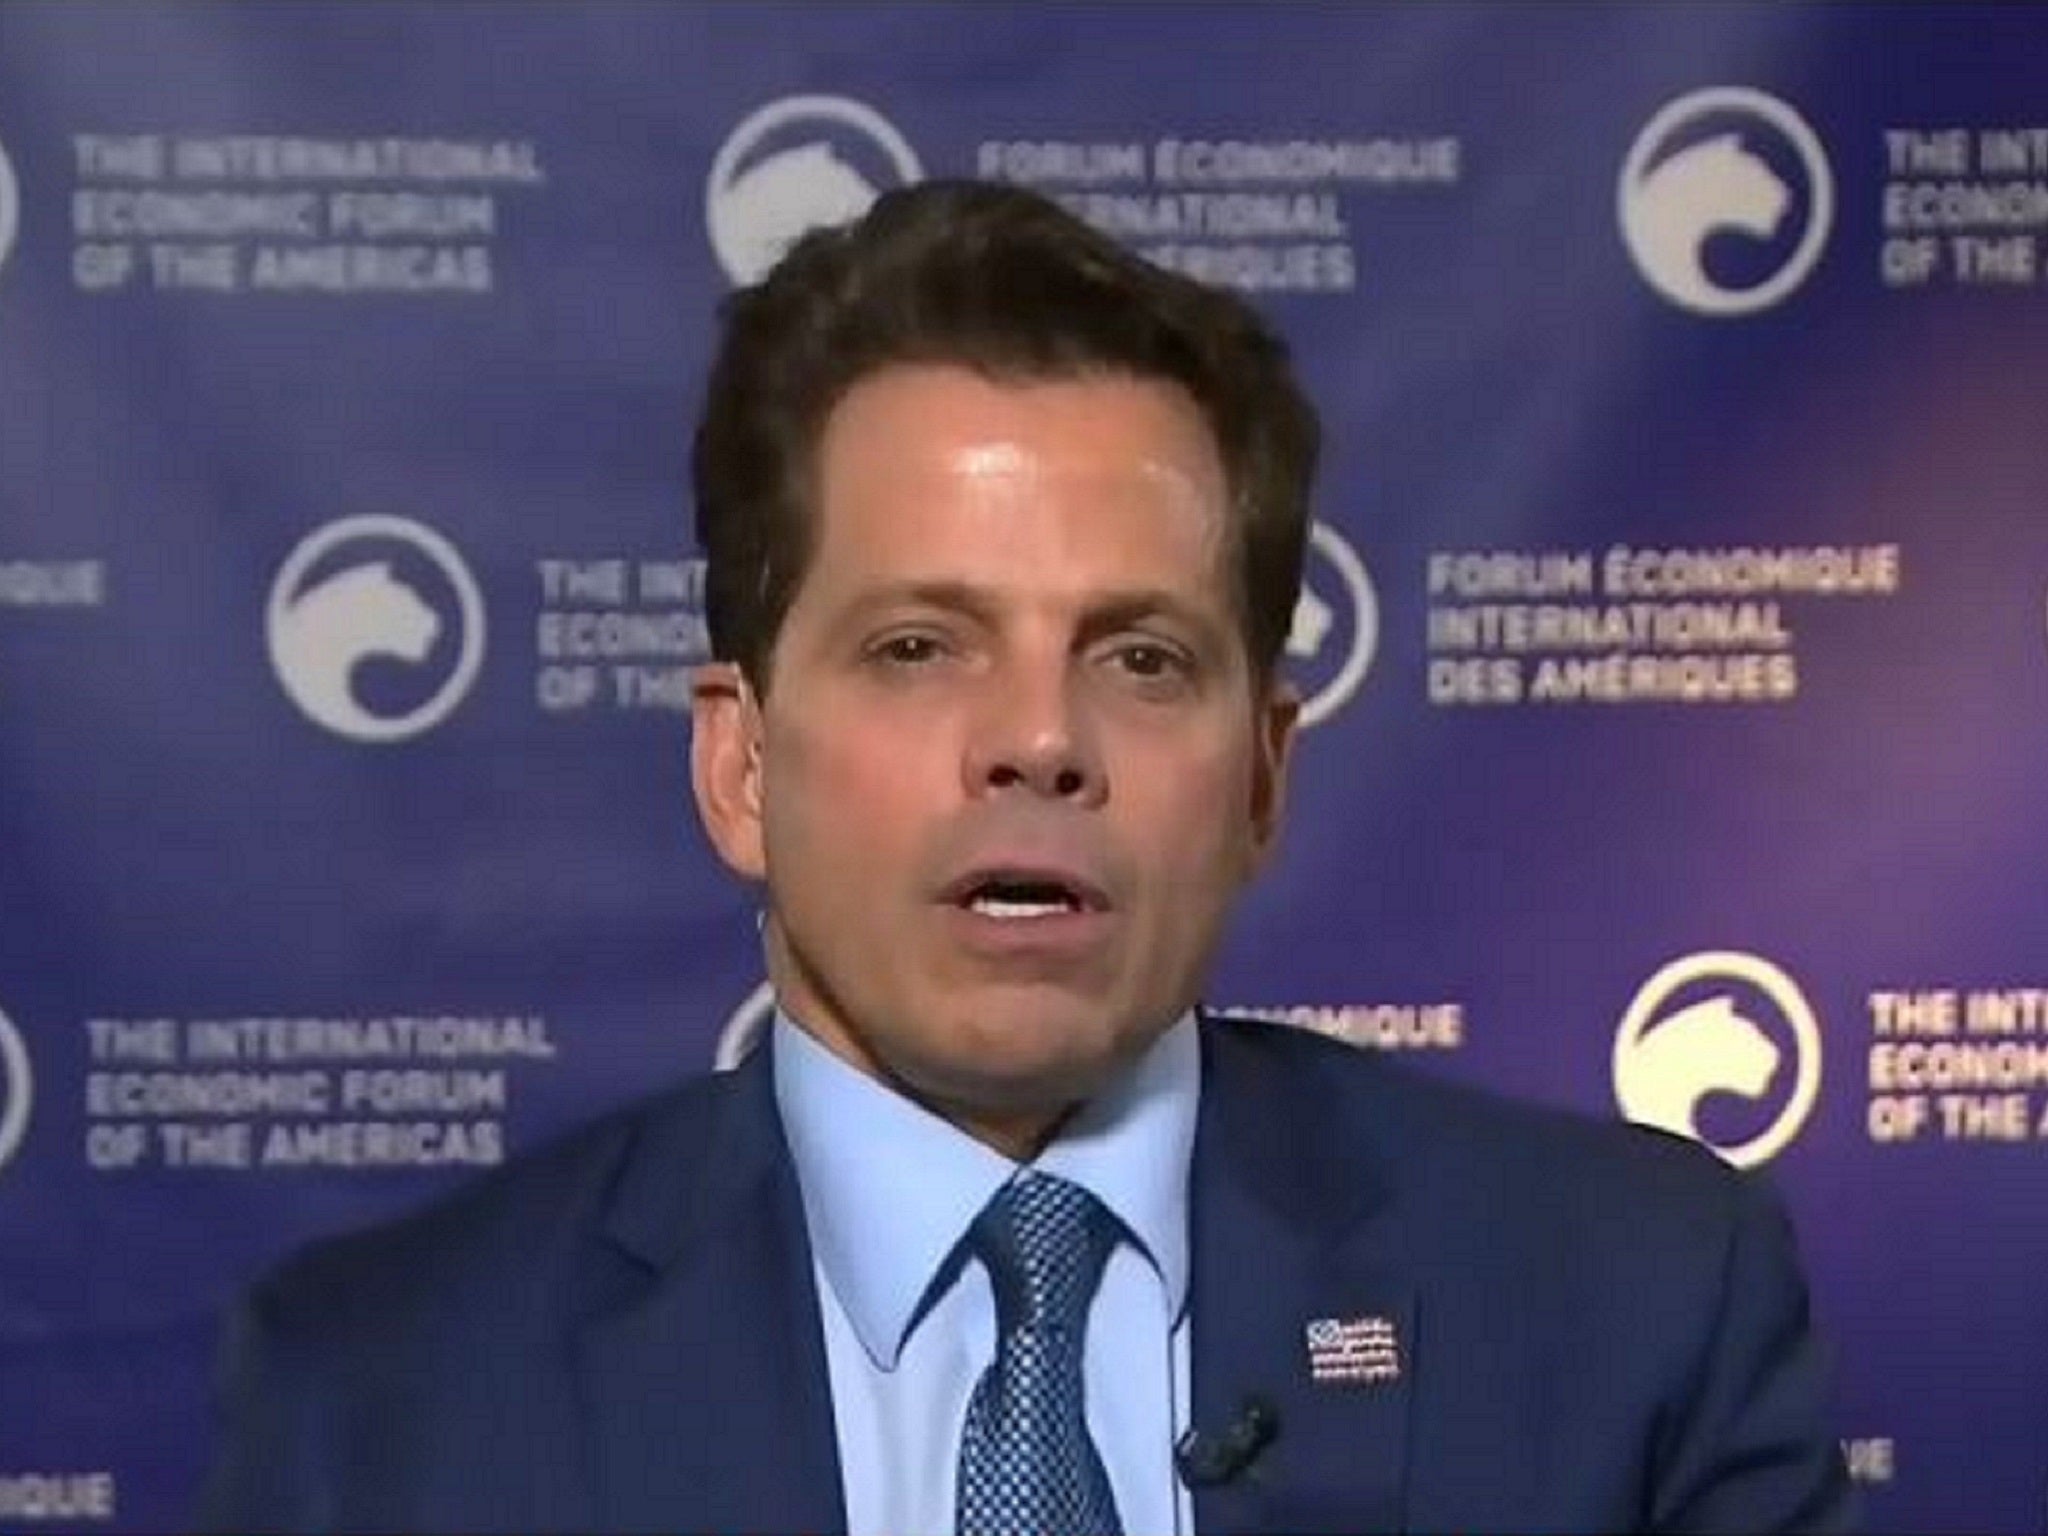 Former White House communications director Anthony Scaramucci speaking about Donald Trump to CTV News, 6 September 2019.